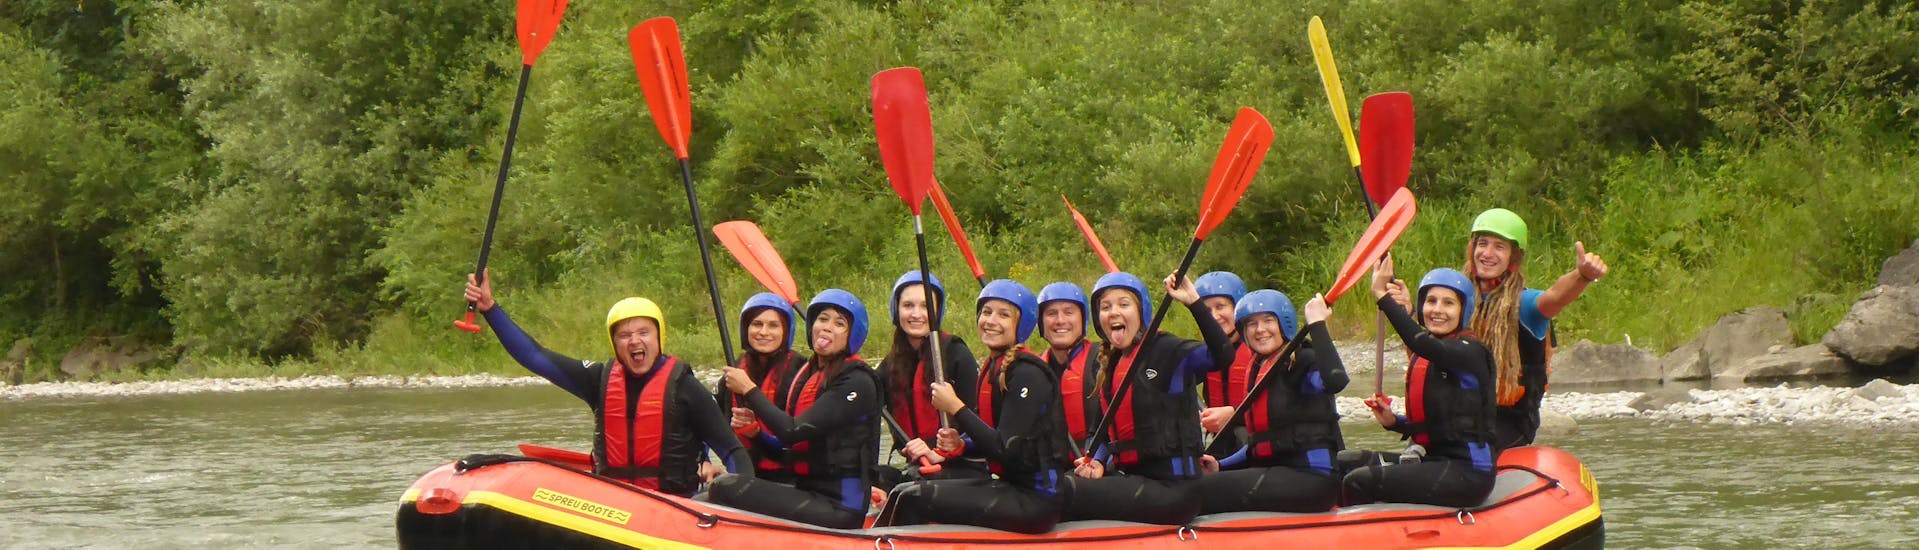 A group having fun during the Business Special: Soft Rafting in Allgäu+ Teambuilding + BBQ with MAP-Erlebnis Blaichach.